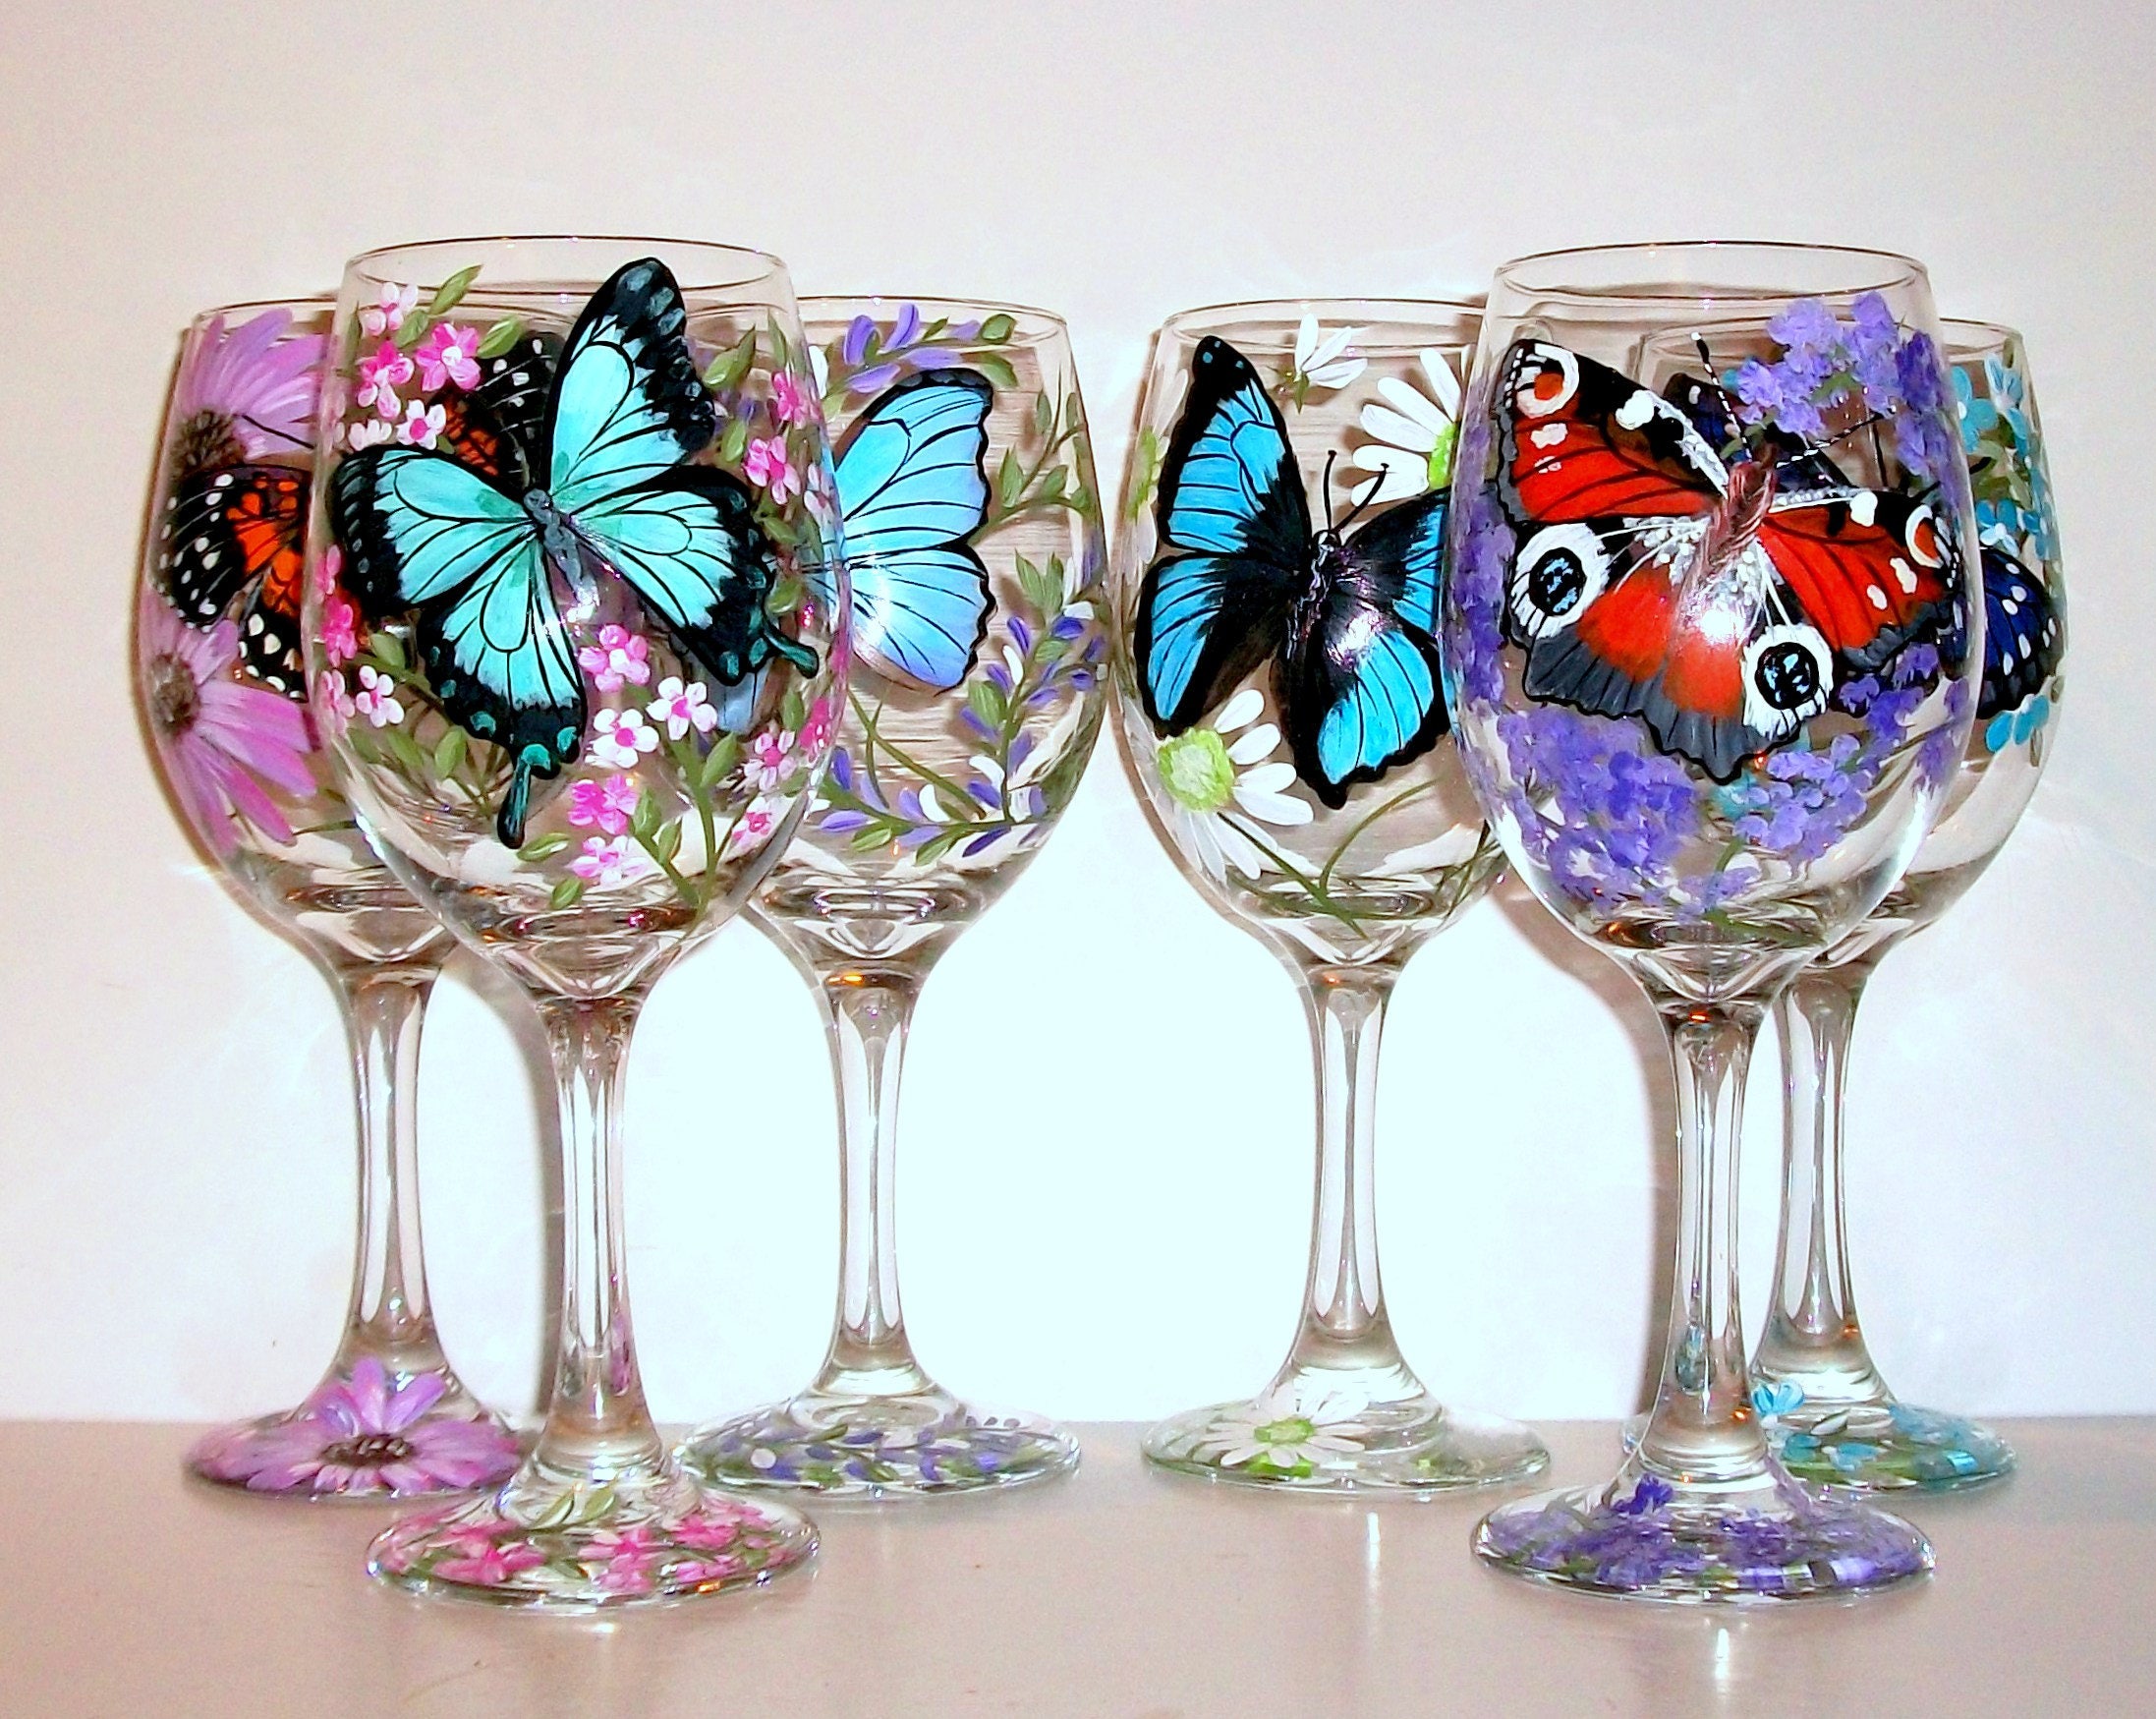 Butterflies and Flowers One Glass Hand Painted Wine Glass | Etsy